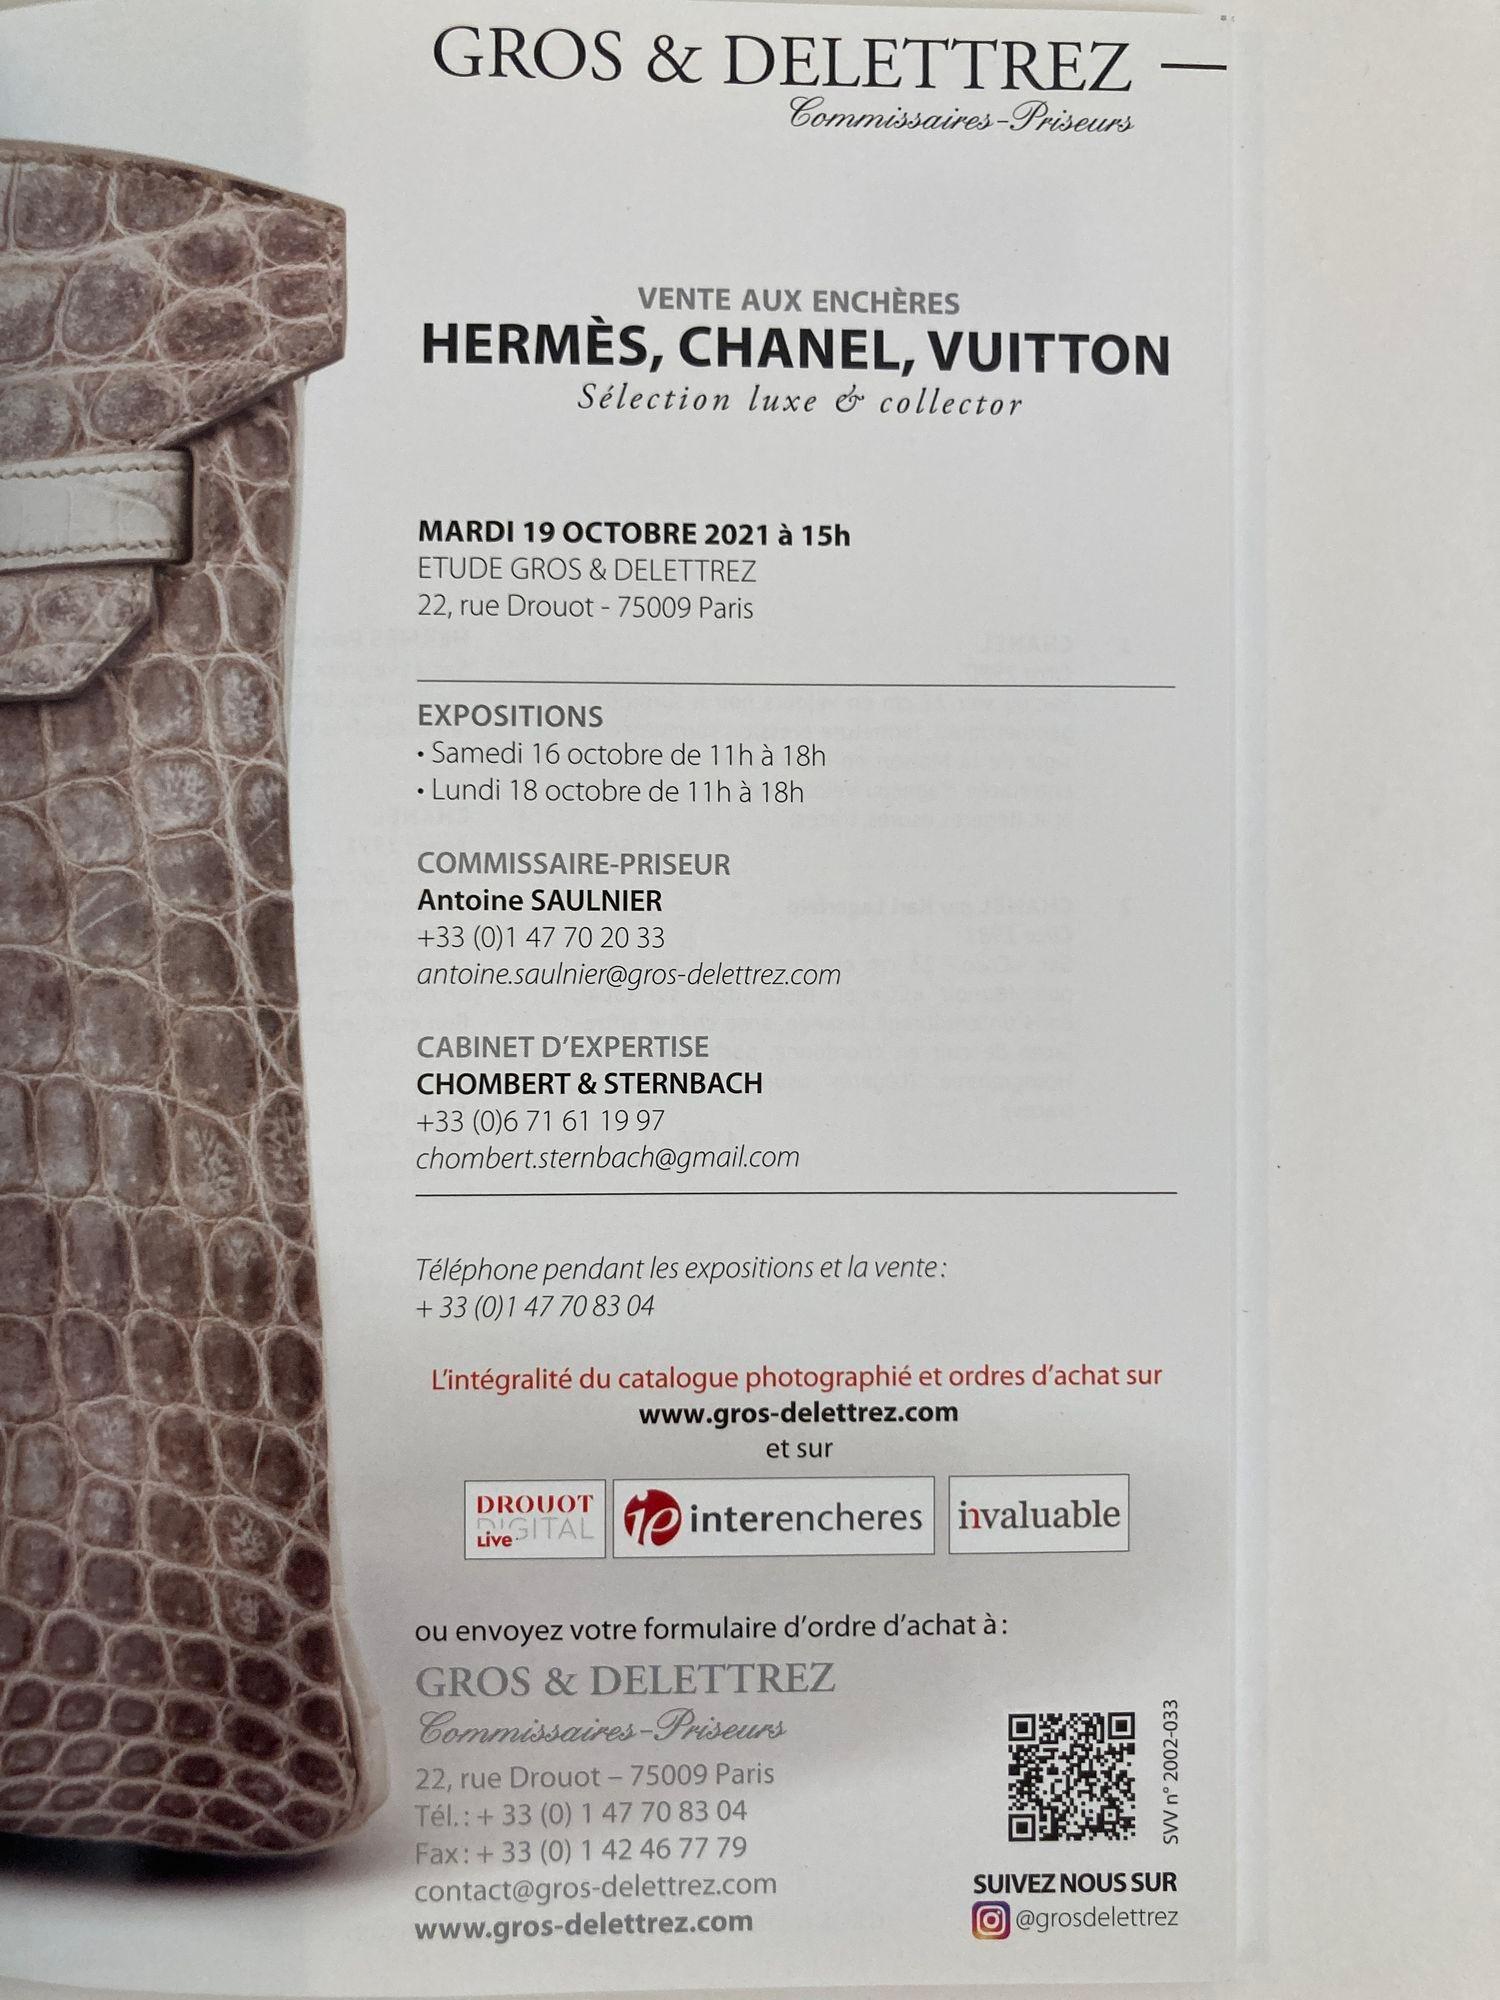 French Hermes Chanel Vuitton Luxe Collector Auction Catalog 2021 by Gros, Delettrez For Sale